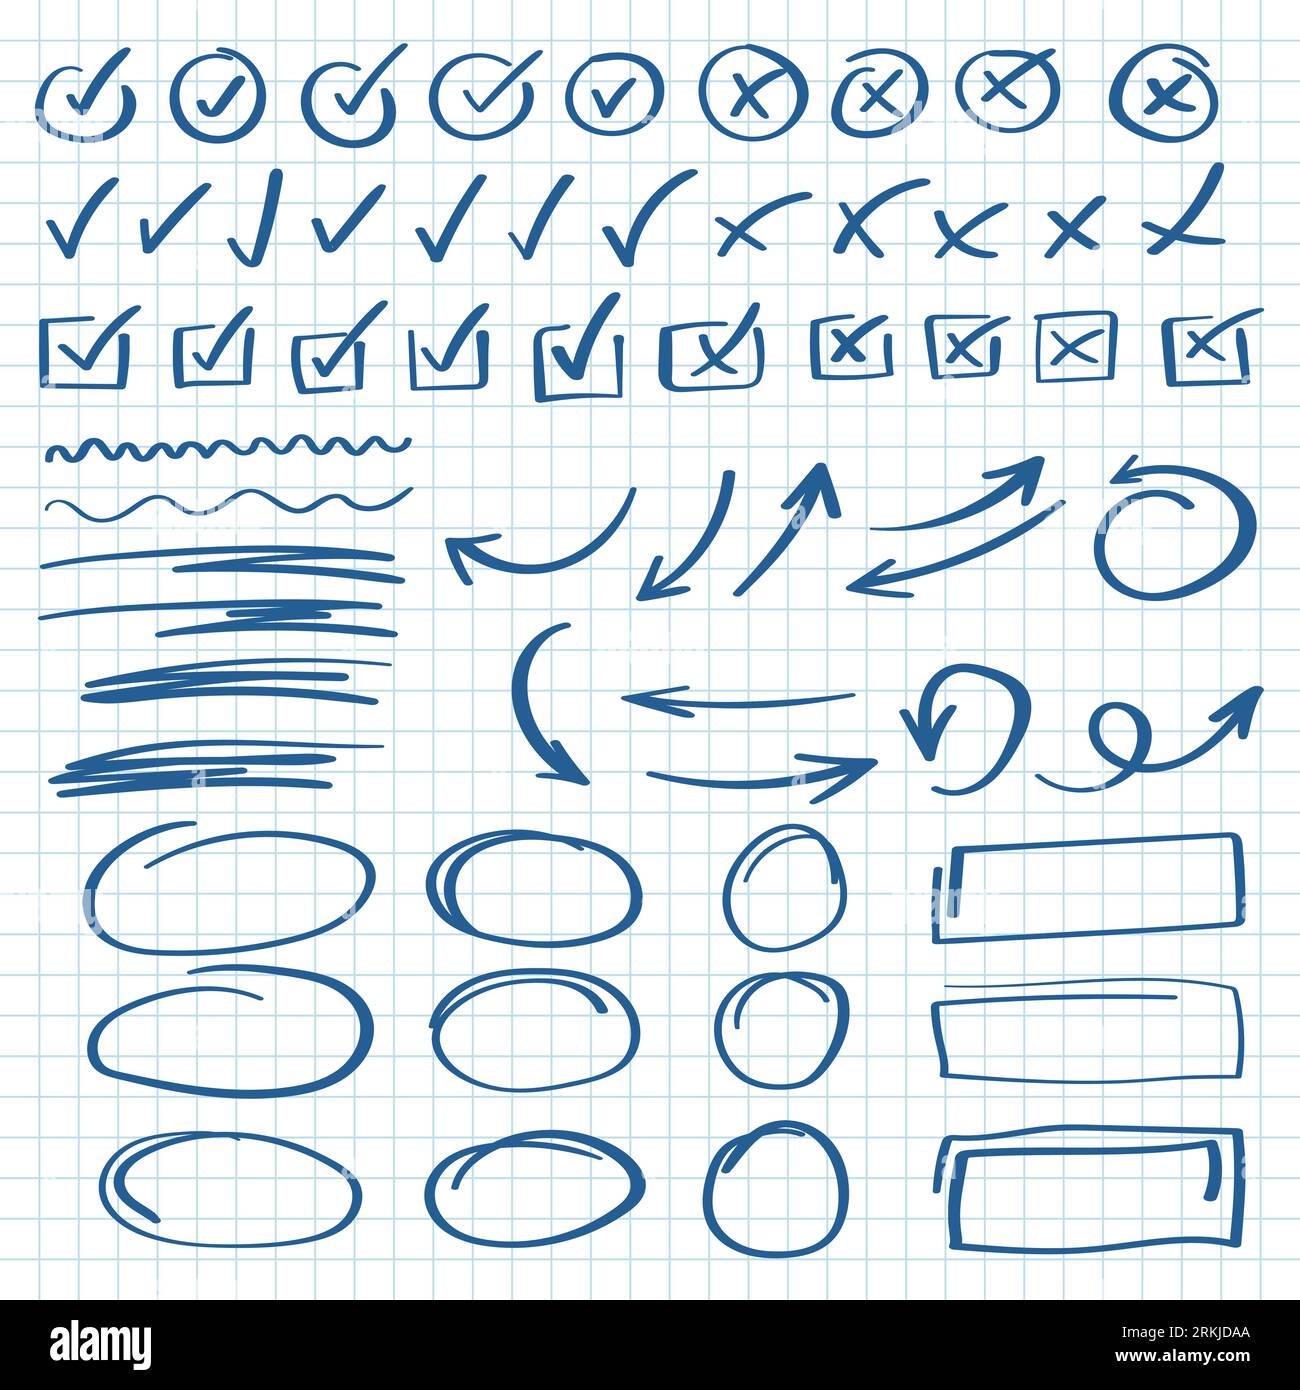 Hand-drawn Real YES And NO Signs, OK And X Symbol Icons, Tick And Cross,  Check Mark Approval, Cross Sign Reject, Calligraphic. Blue Realistic Sign  Made By Pen In Black Square Box Border